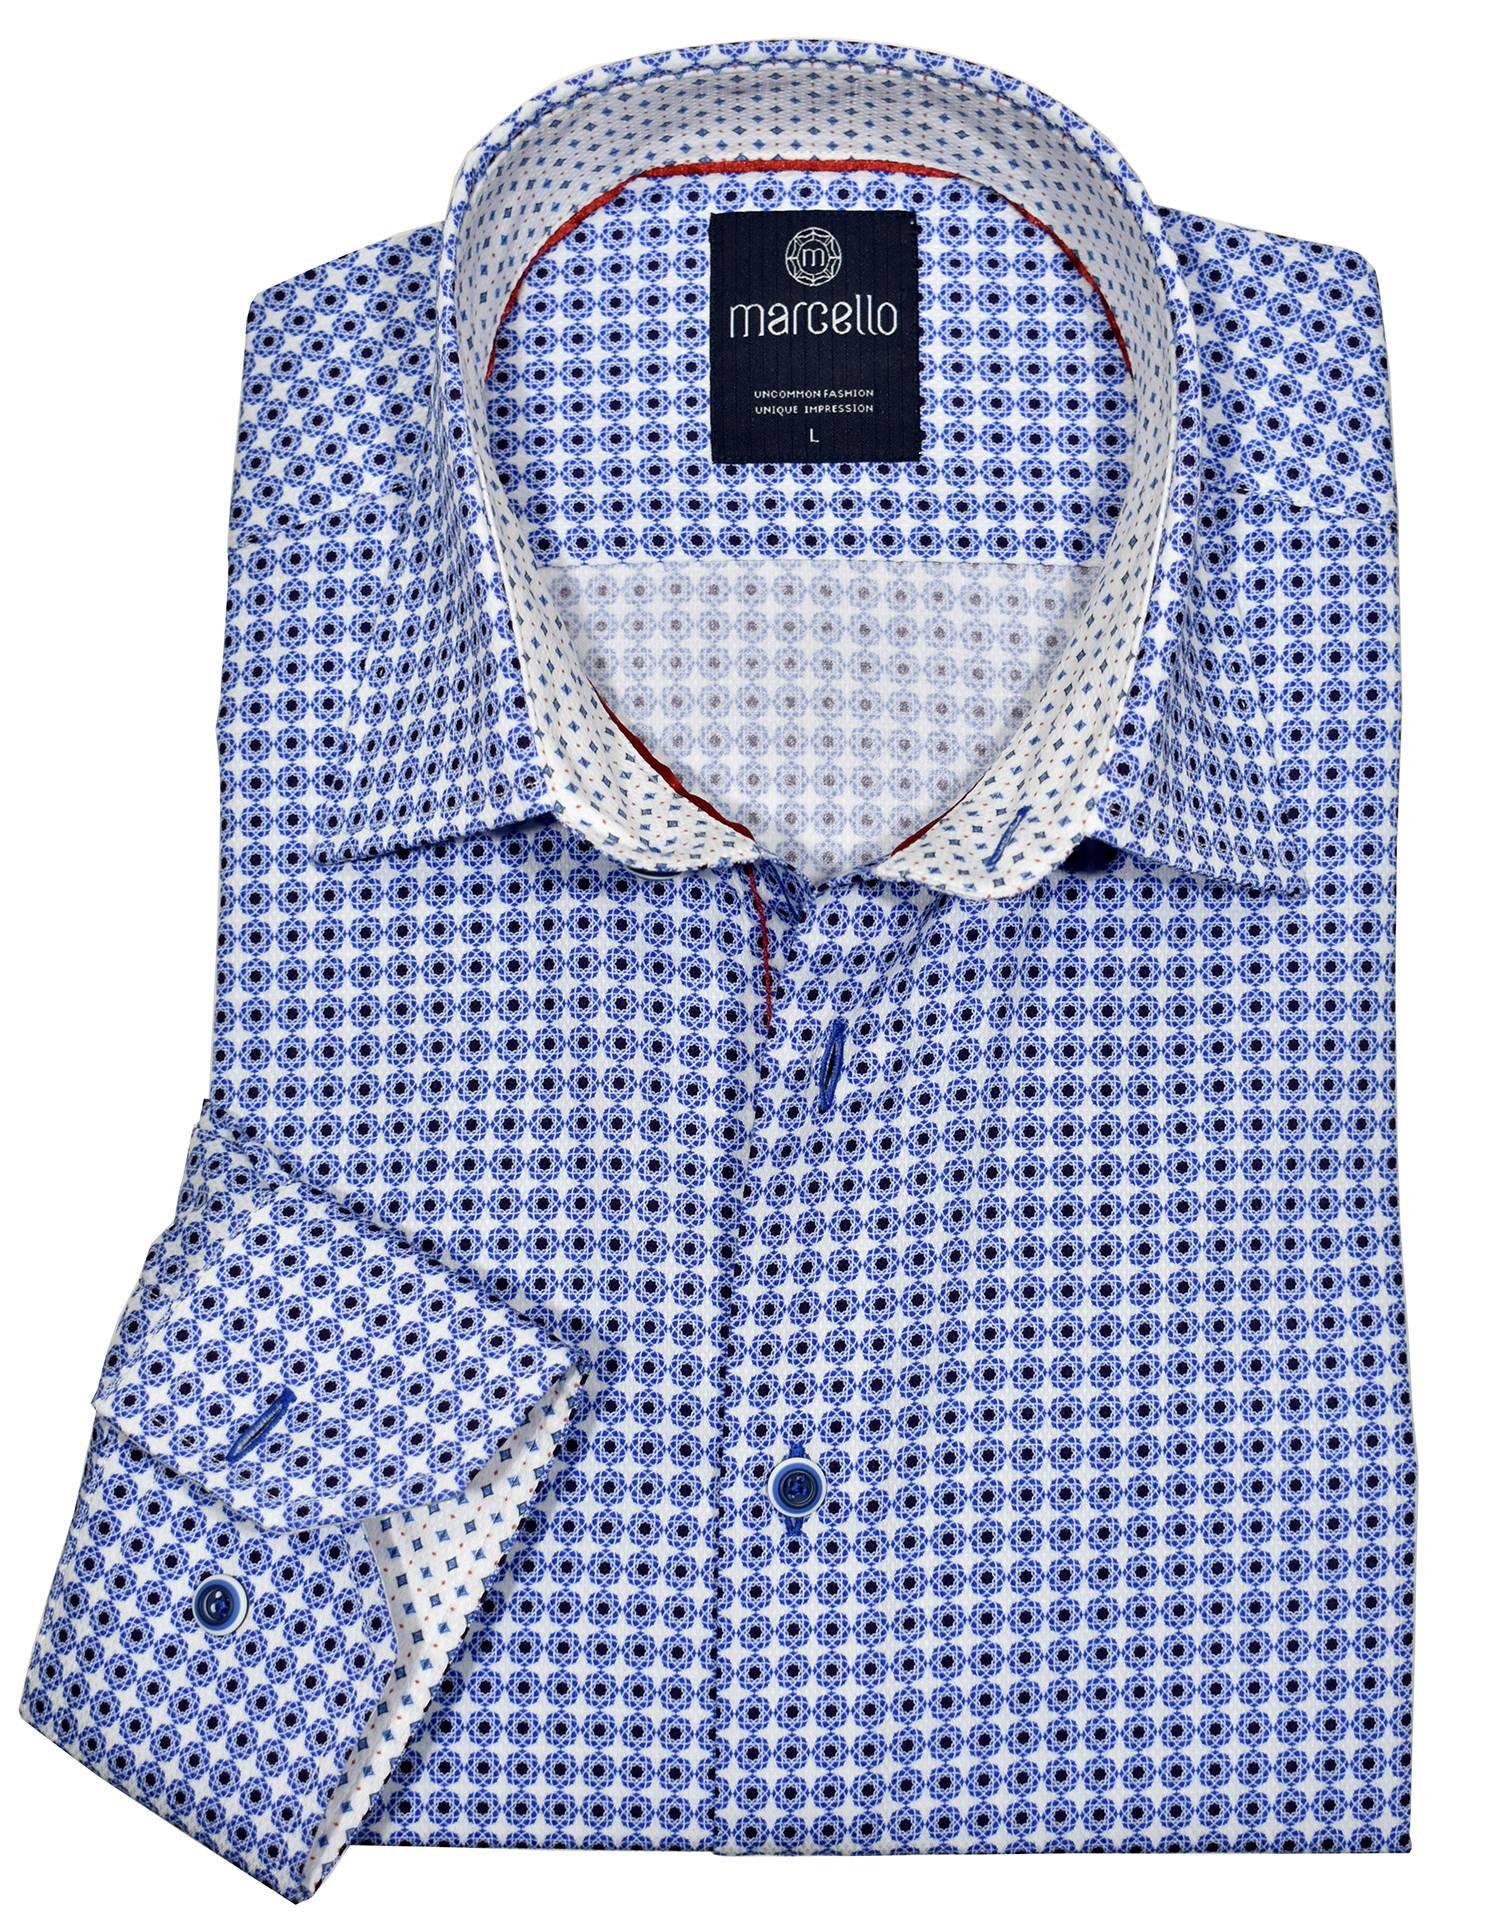 Exclusive 1 Piece Roll Collar.  The one piece collar looks exceptional on and will quickly become your favorite shirt.  Fine cotton textured fabric. Soft textured fabric feels like fine cotton & silk. Rich, elegant neat pattern in blue and navy. Custom selected buttons. 2 button signature cuffs. Classic shaped fit. Shirt by Marcello Sport